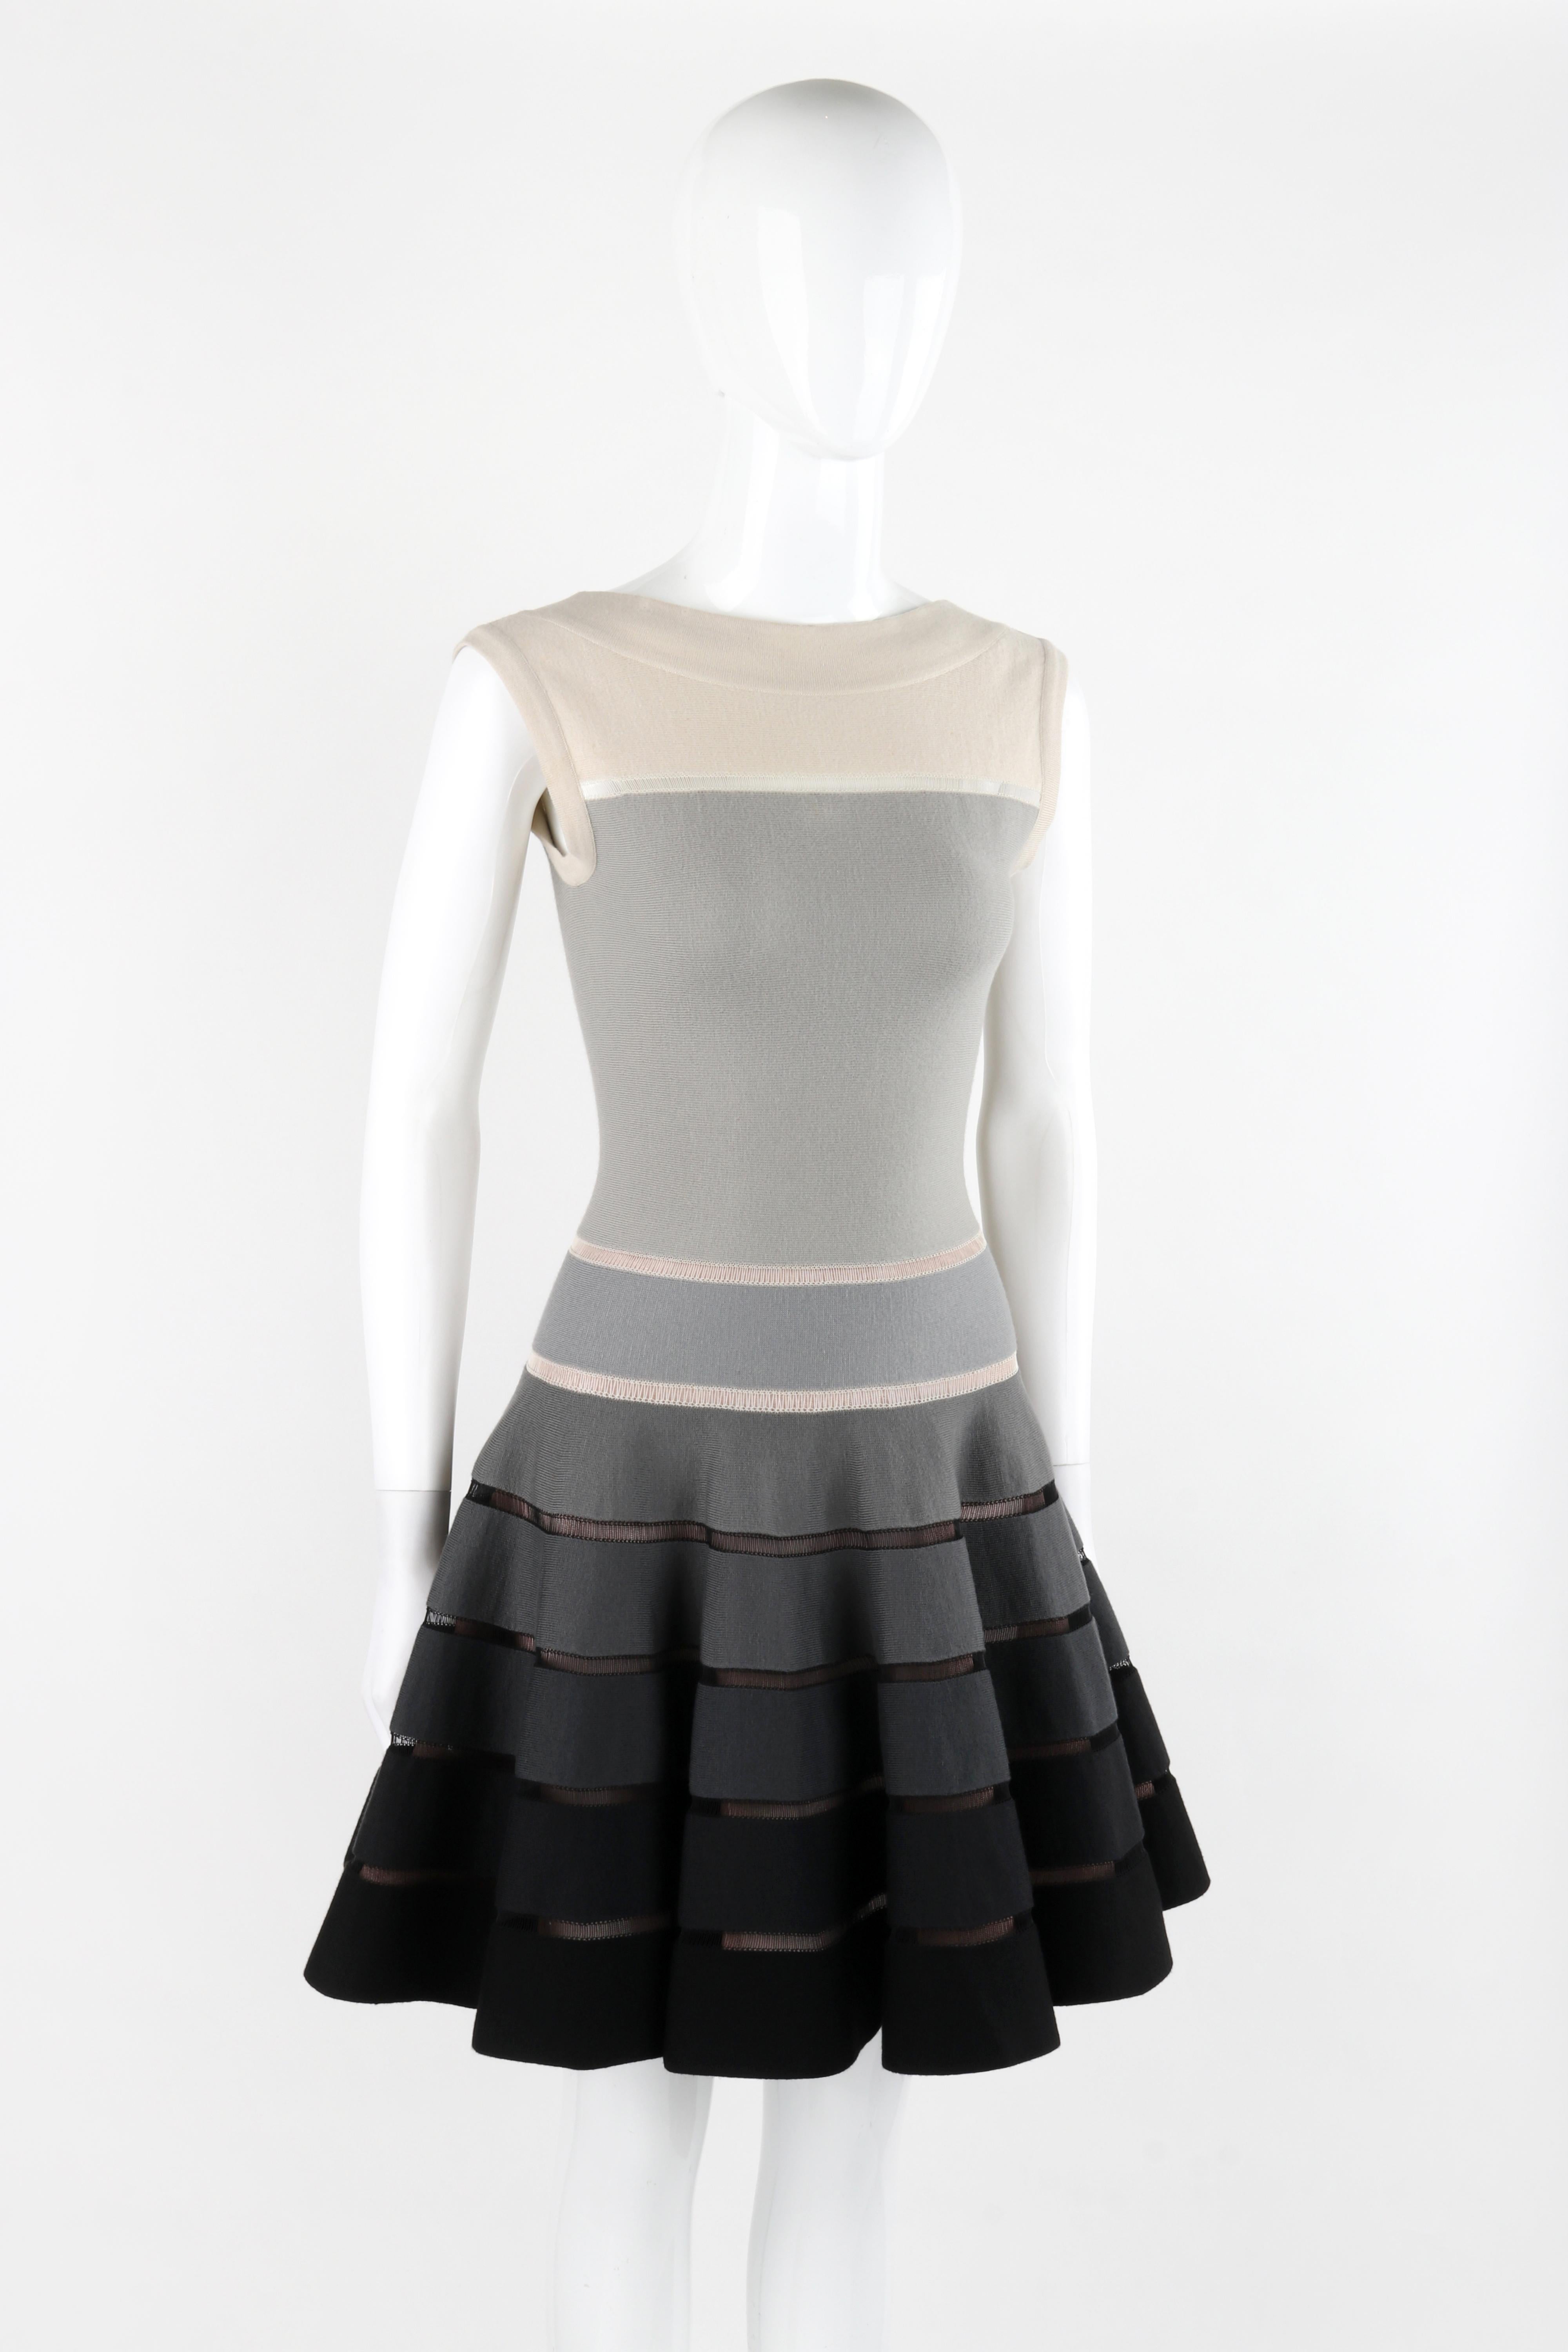 ALAIA PARIS c. 2010 Monochrome Ombre Wool Silk Fit & Flare Skater Mini Dress In Good Condition For Sale In Thiensville, WI